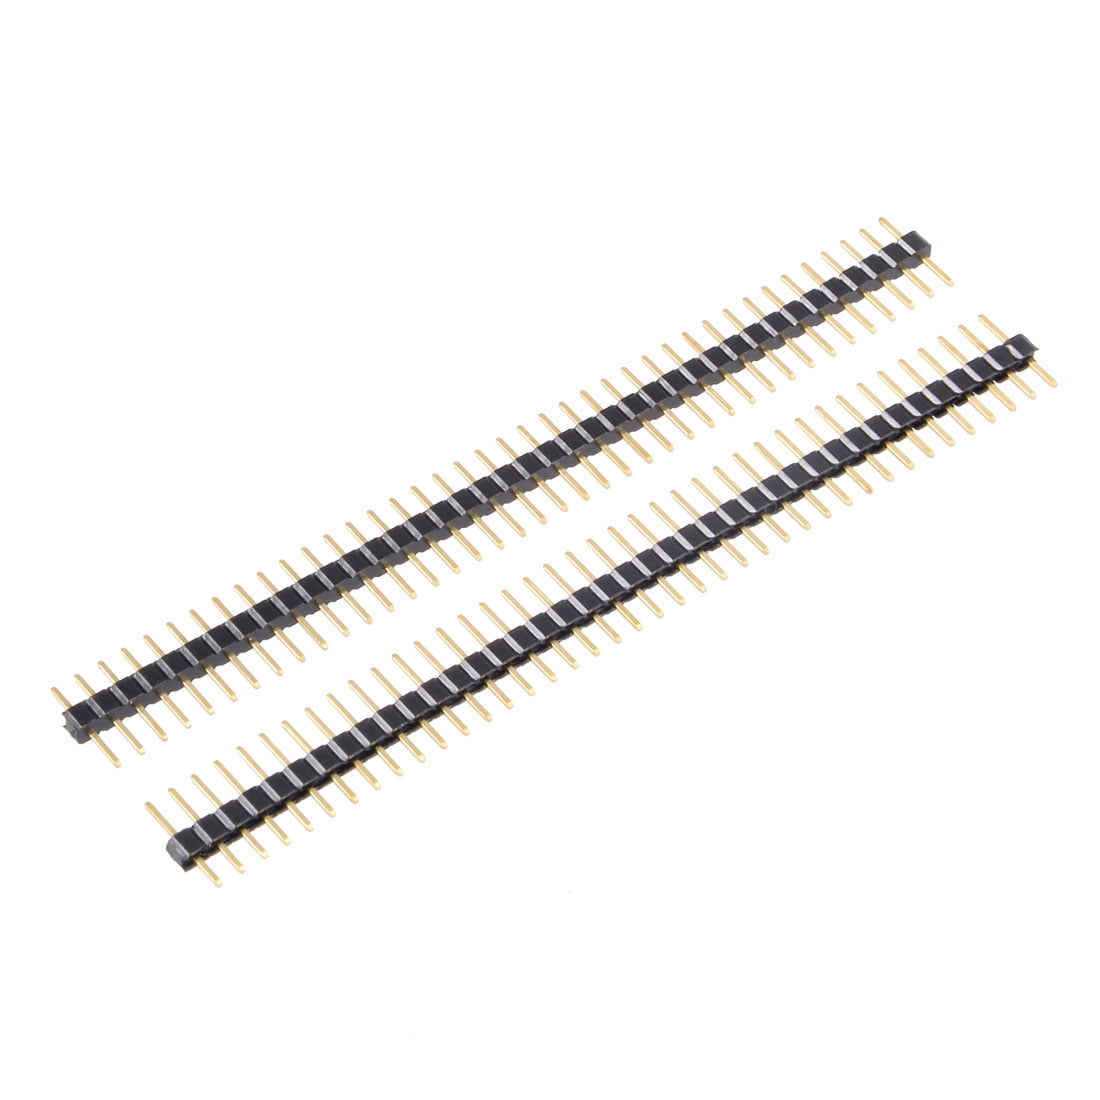 10Pcs Pitch 2mm 2x40 Pin Right Angle Male Double Row Pin Header Strip 